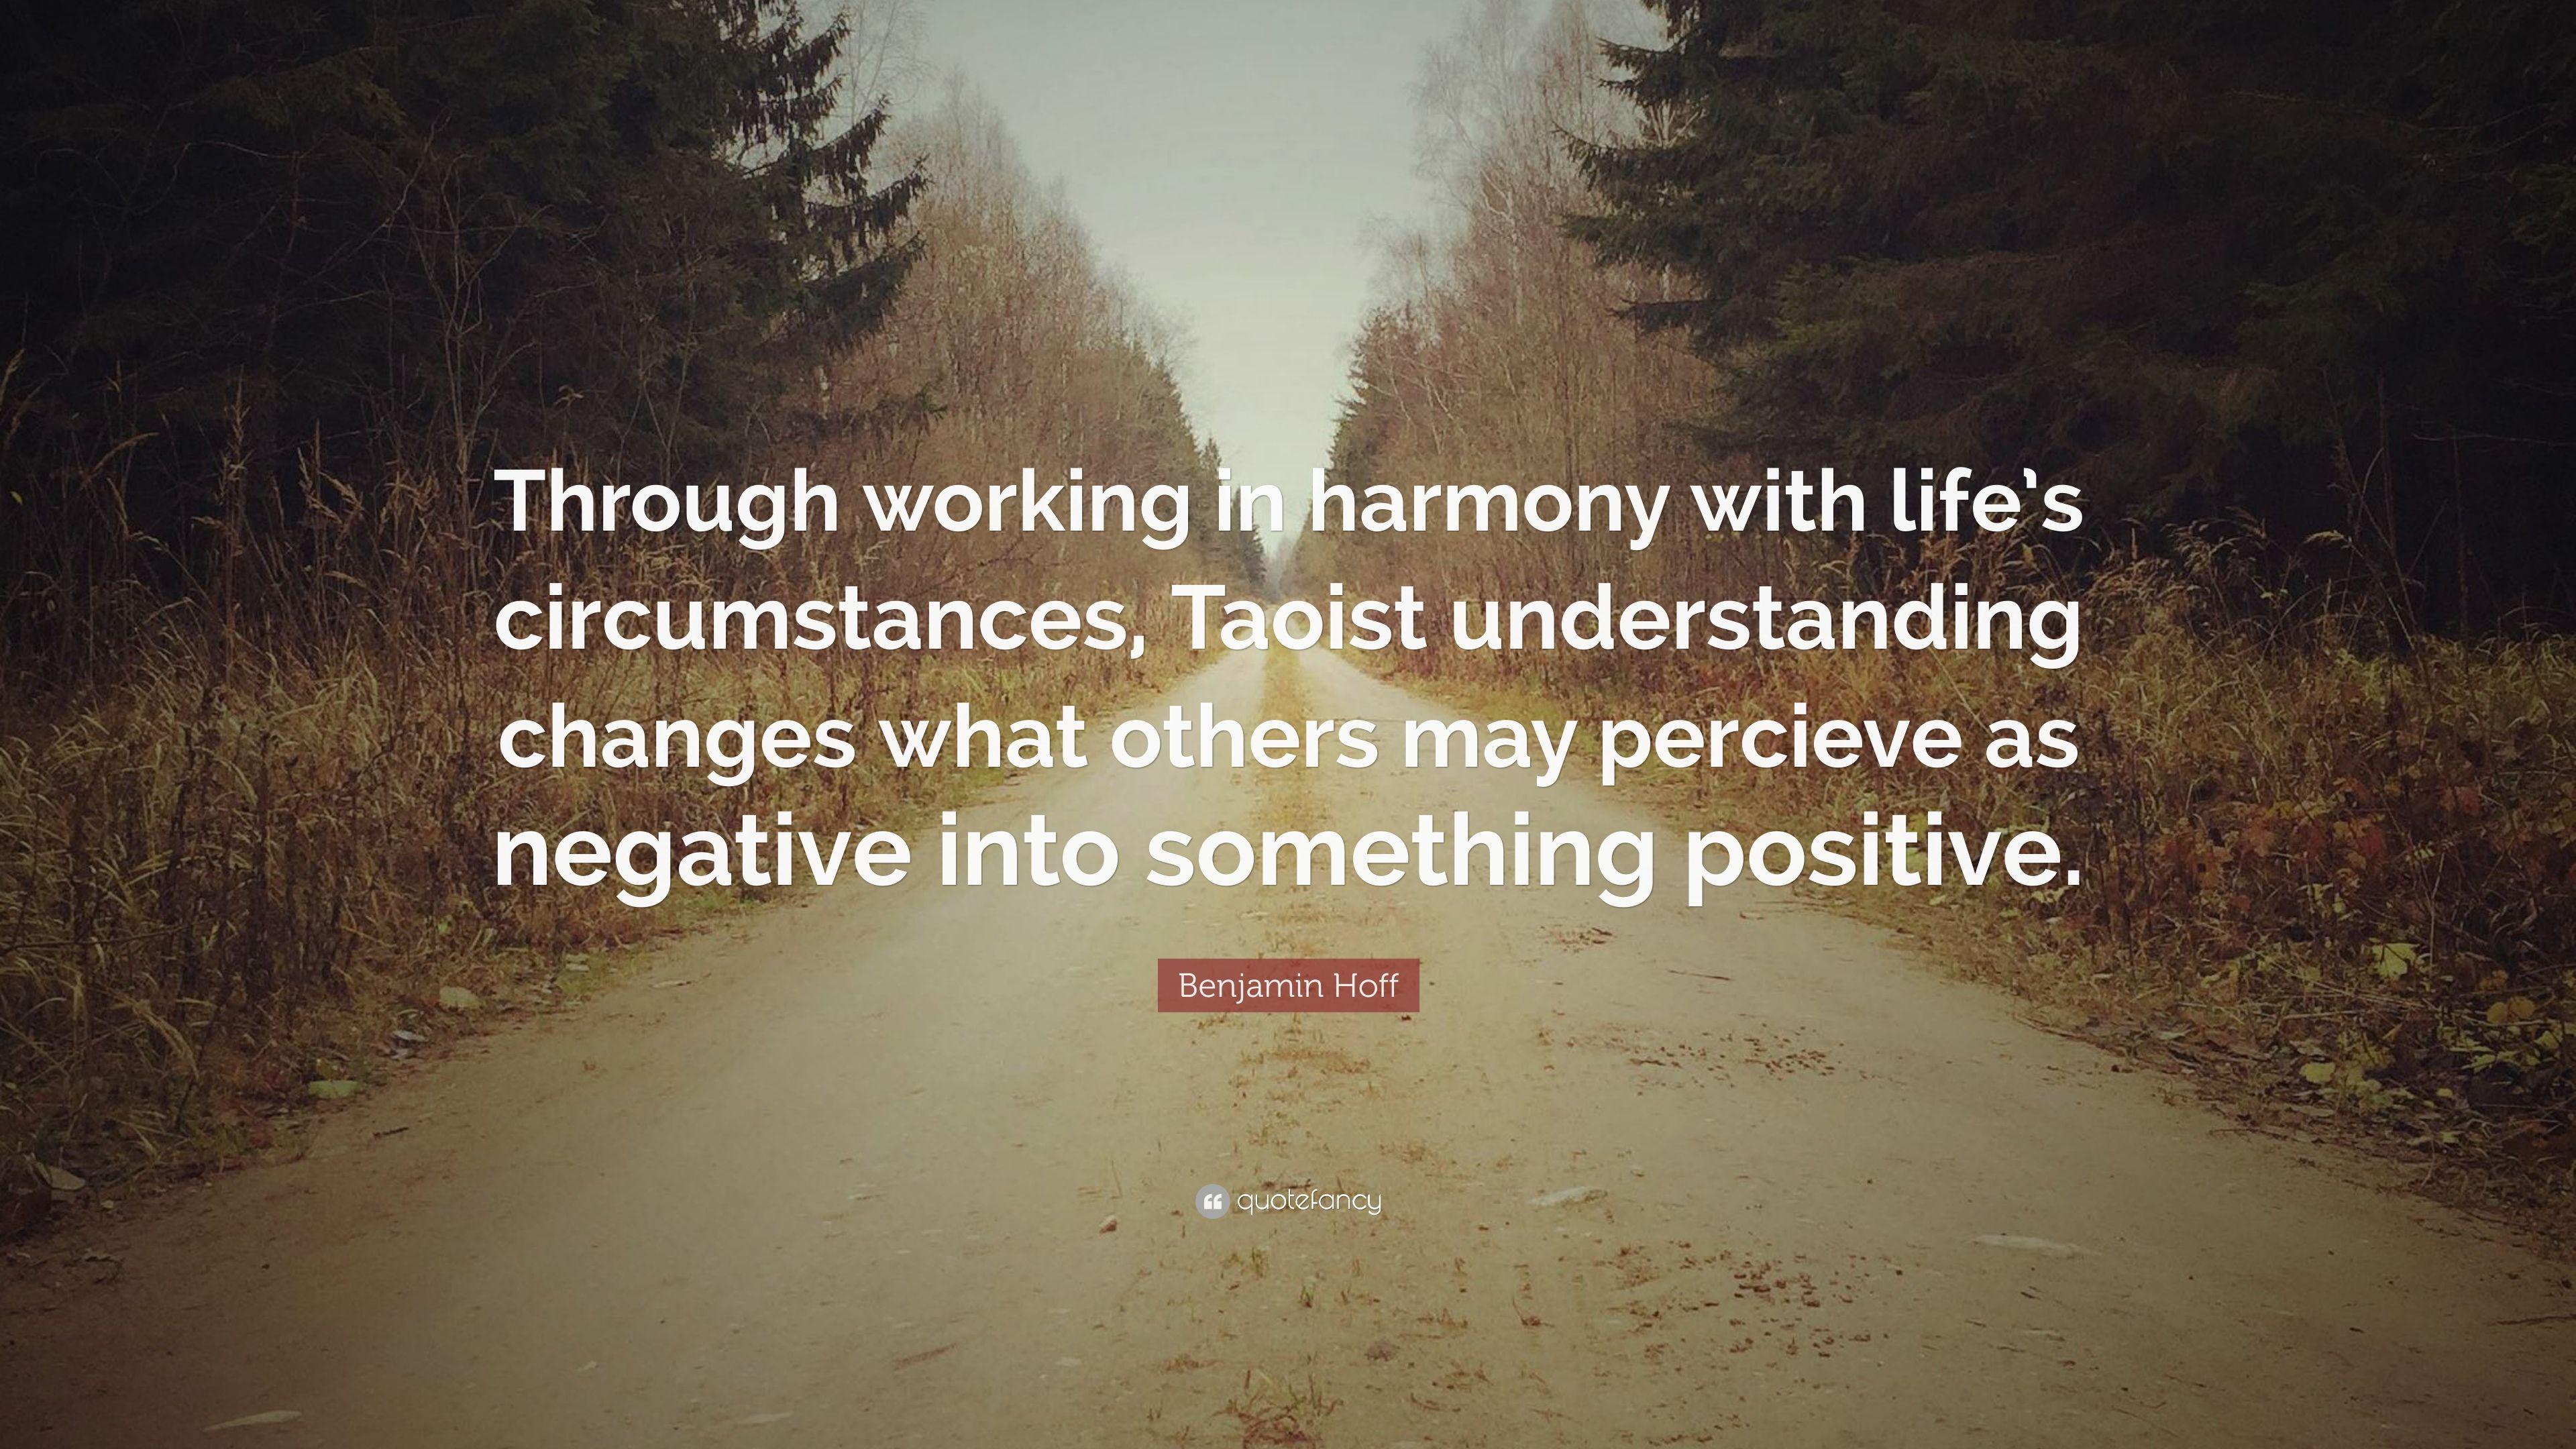 Benjamin Hoff Quote: “Through working in harmony with life's